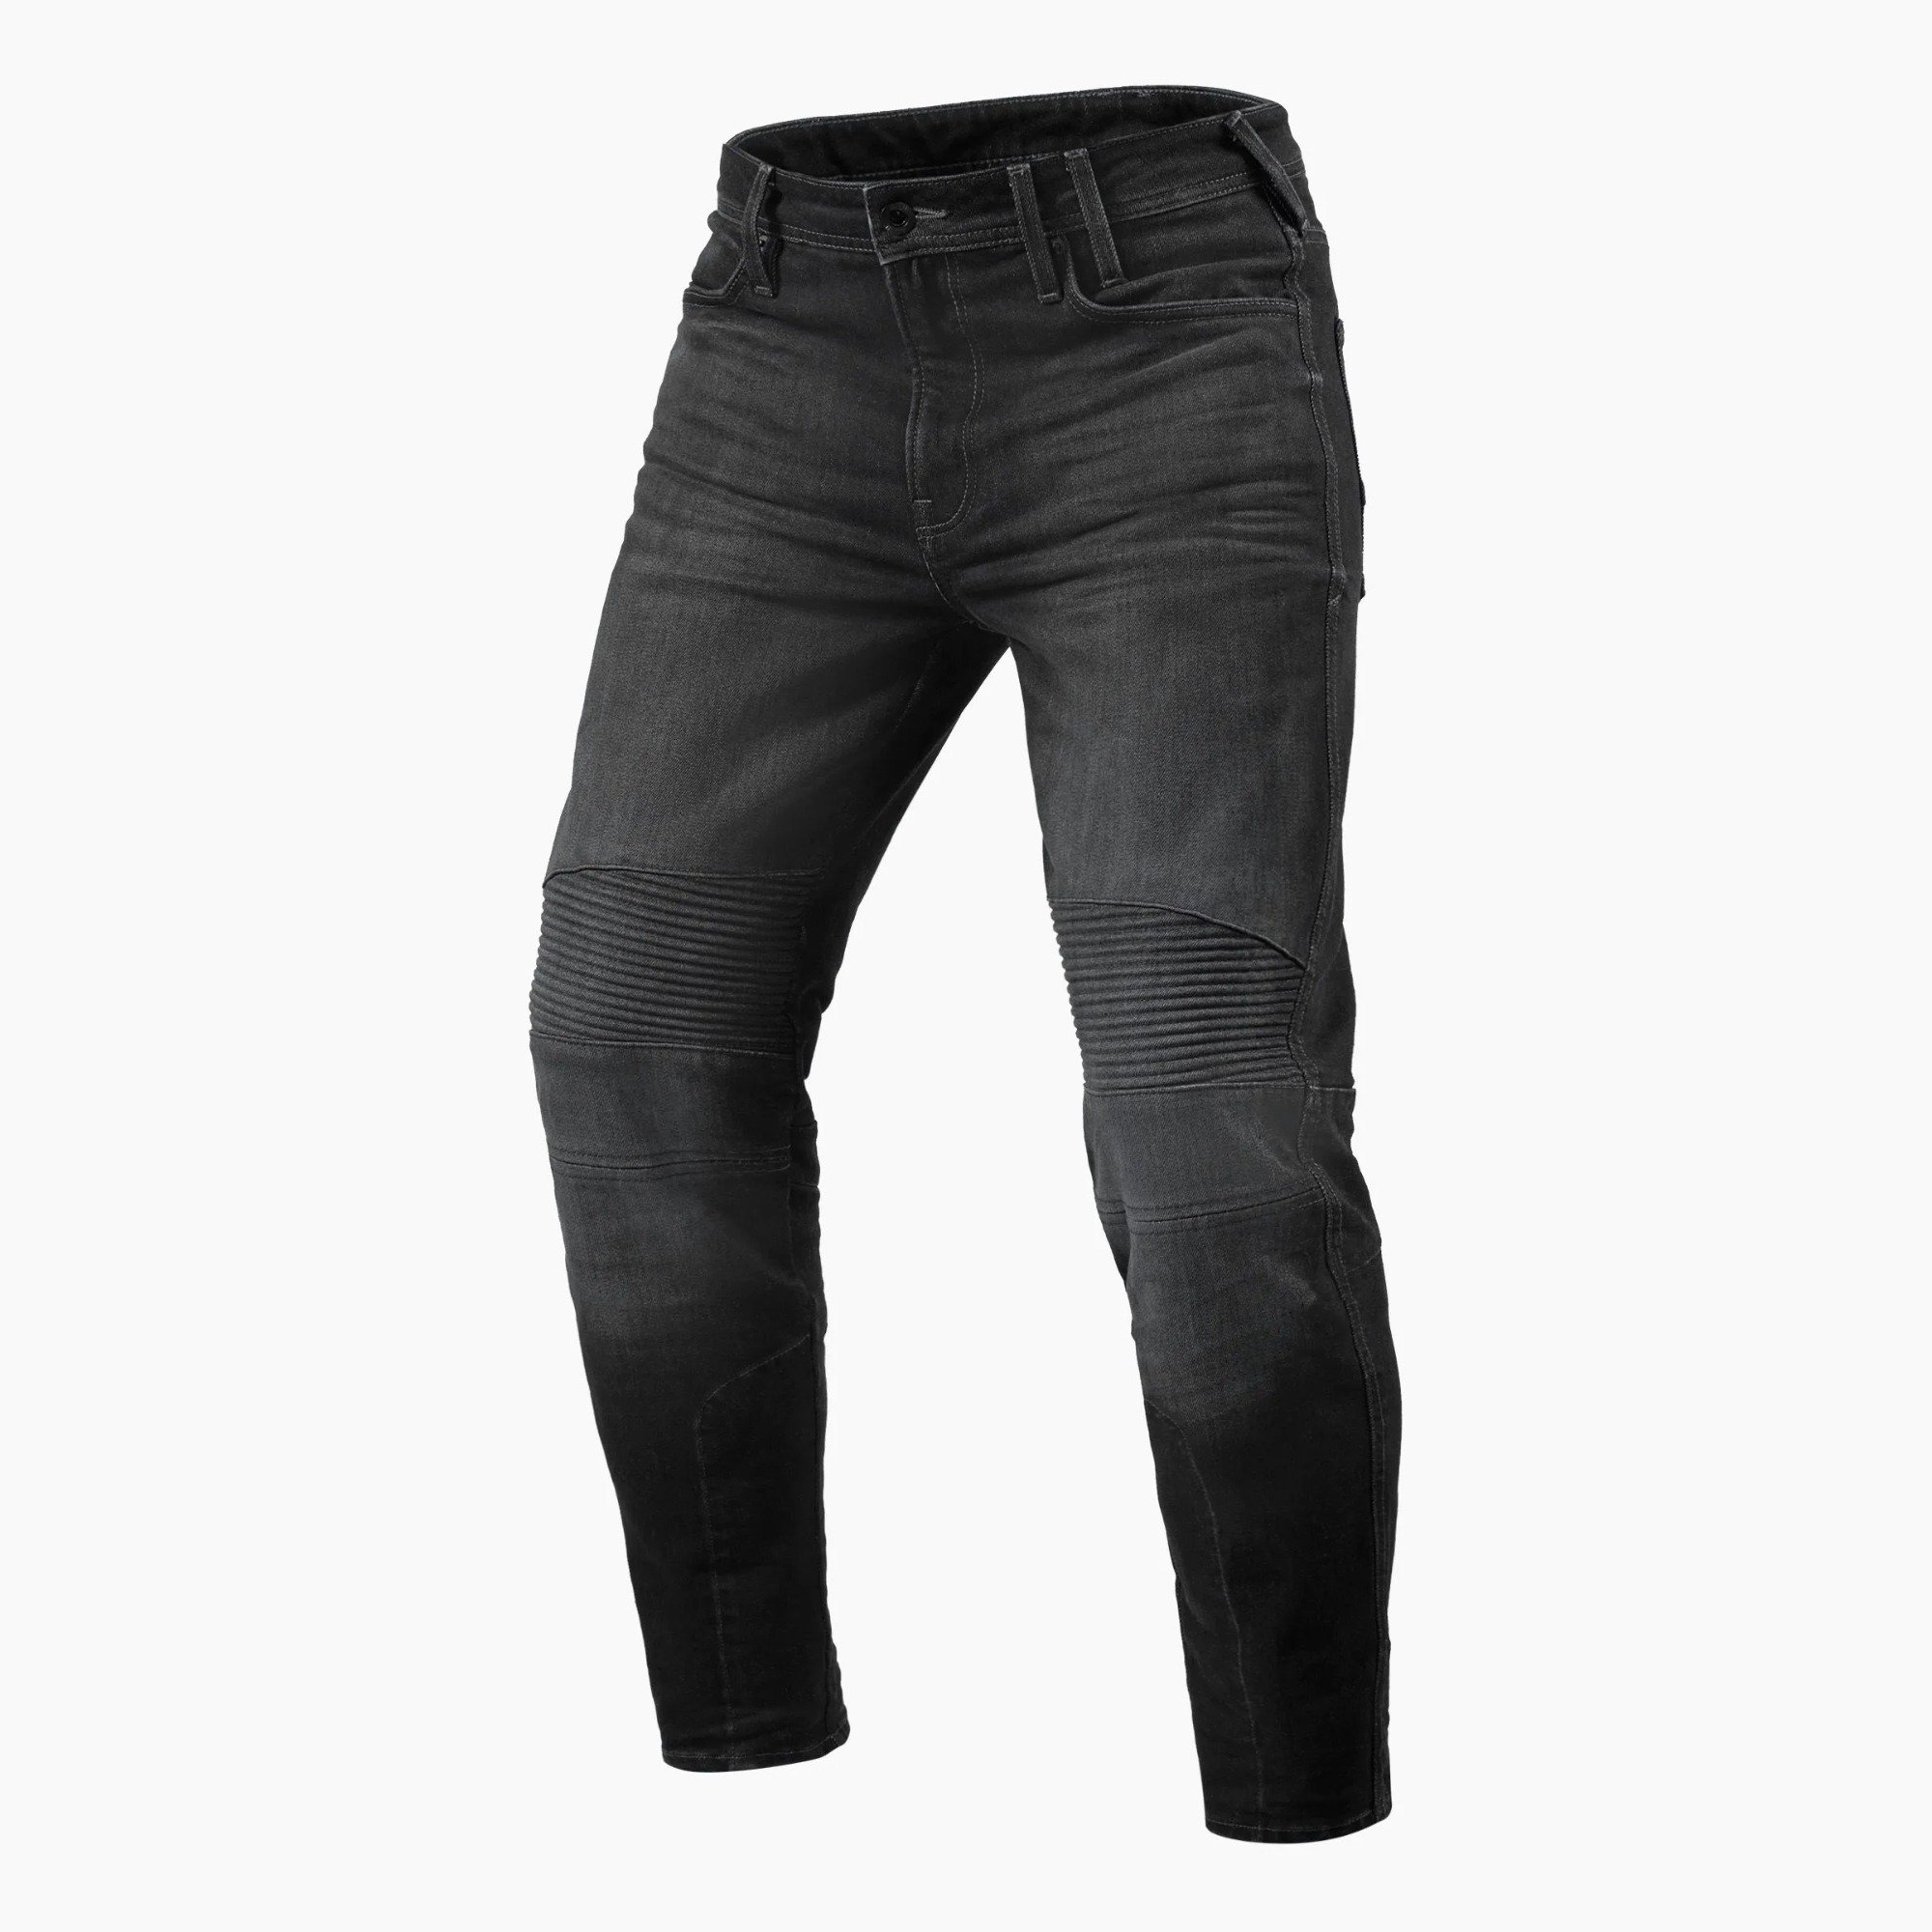 Image of REV'IT! Jeans Moto 2 TF Dark Grey Used Motorcycle Jeans Size L32/W28 ID 8700001337670